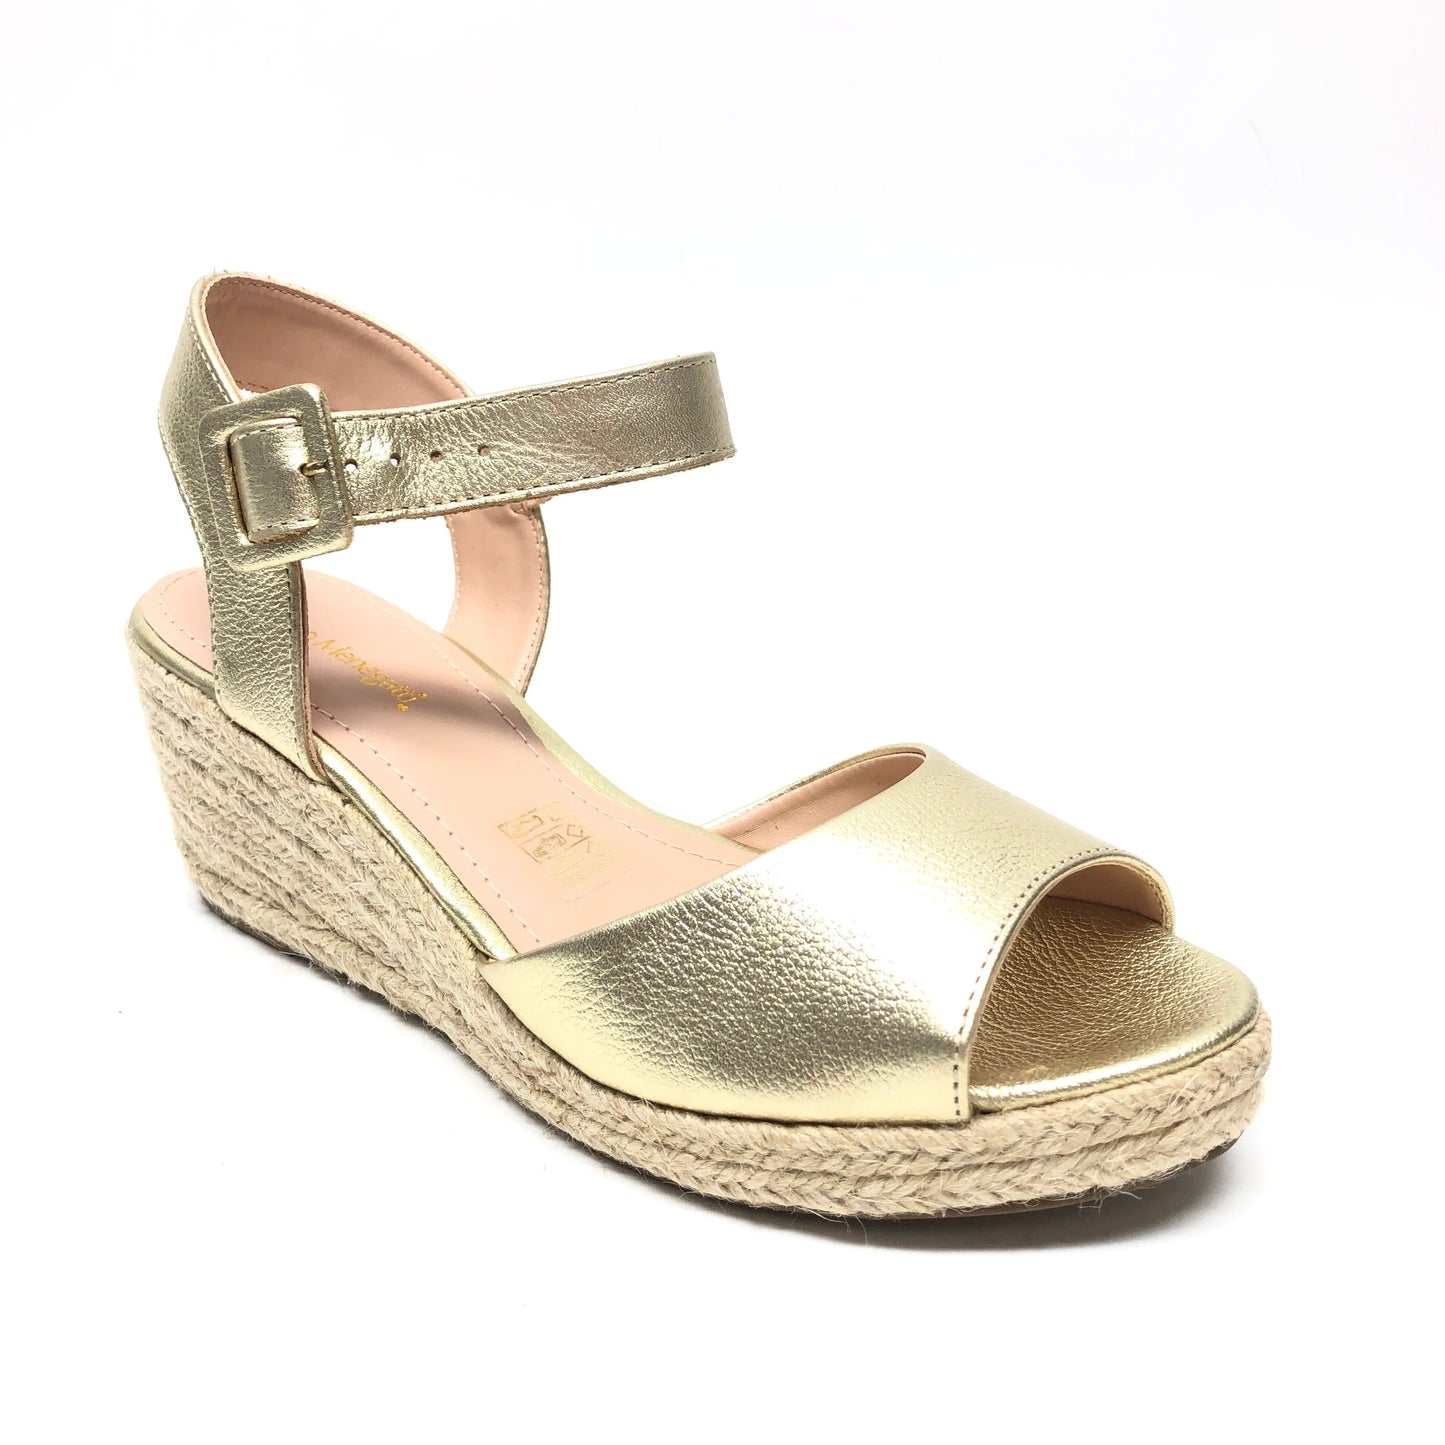 Gold Sandals Heels Wedge Clothes Mentor, Size 8